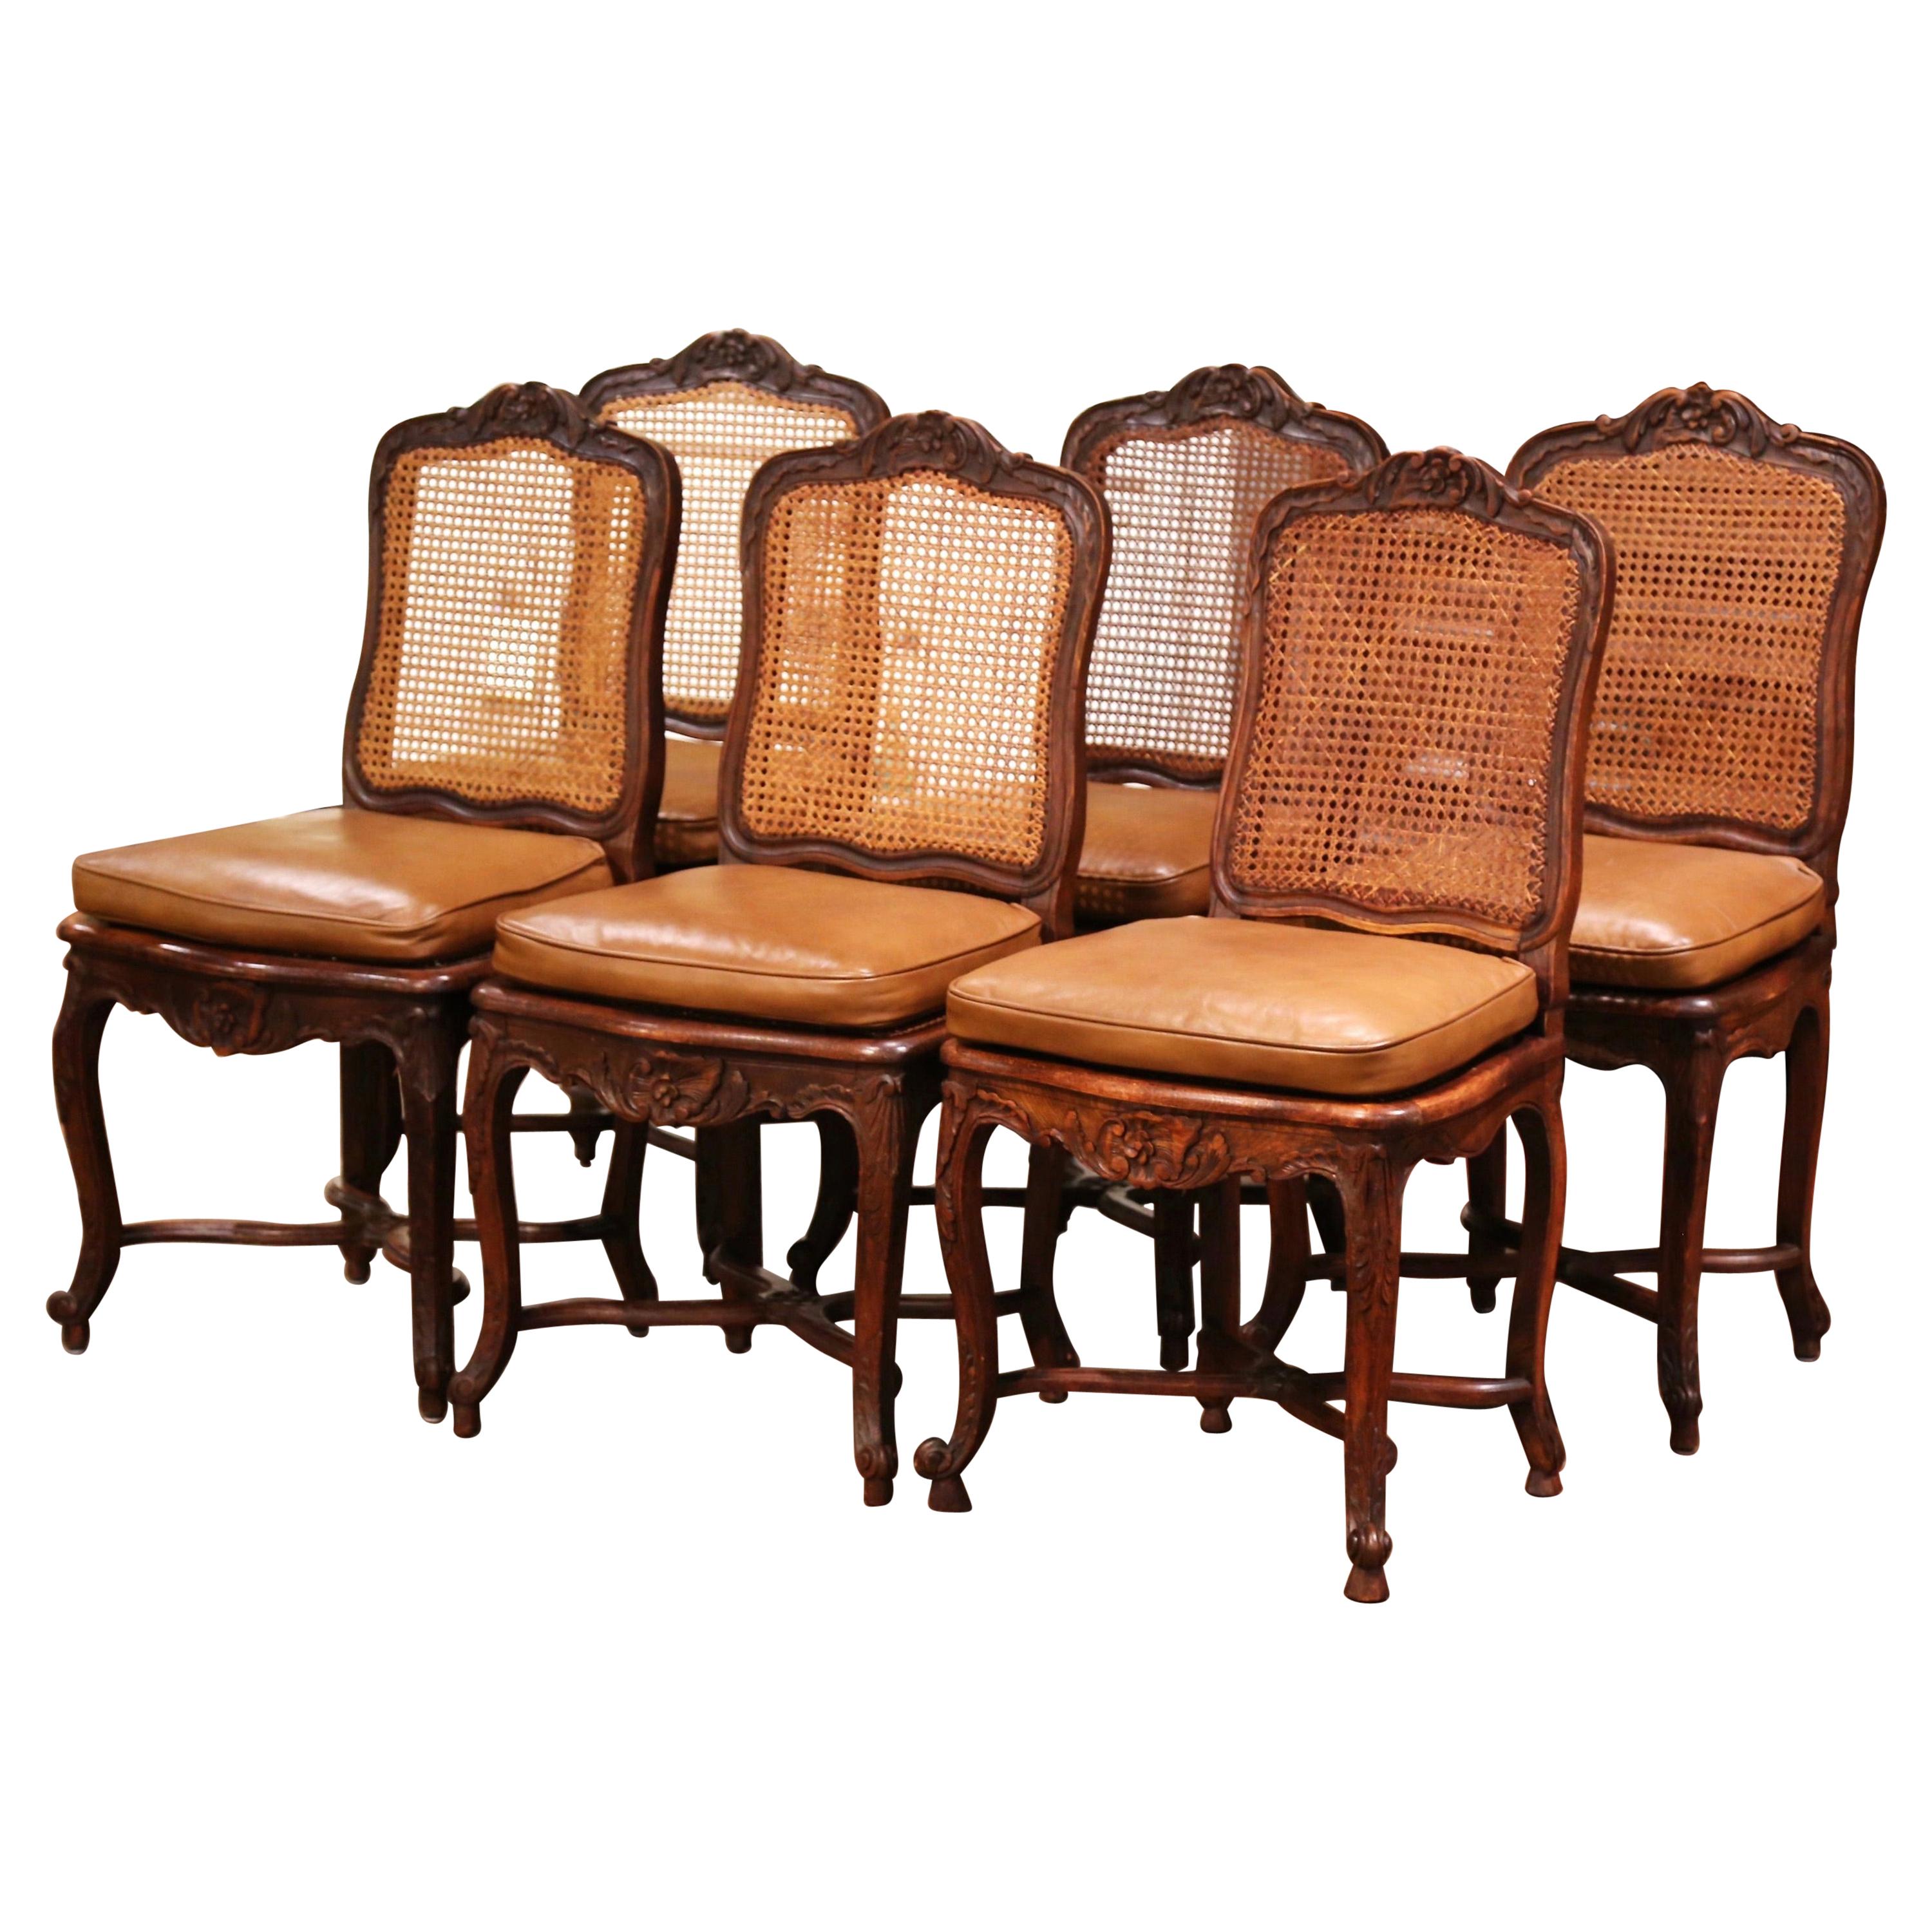 19th Century French Louis XV Carved Walnut and Cane Chairs, Set of Six